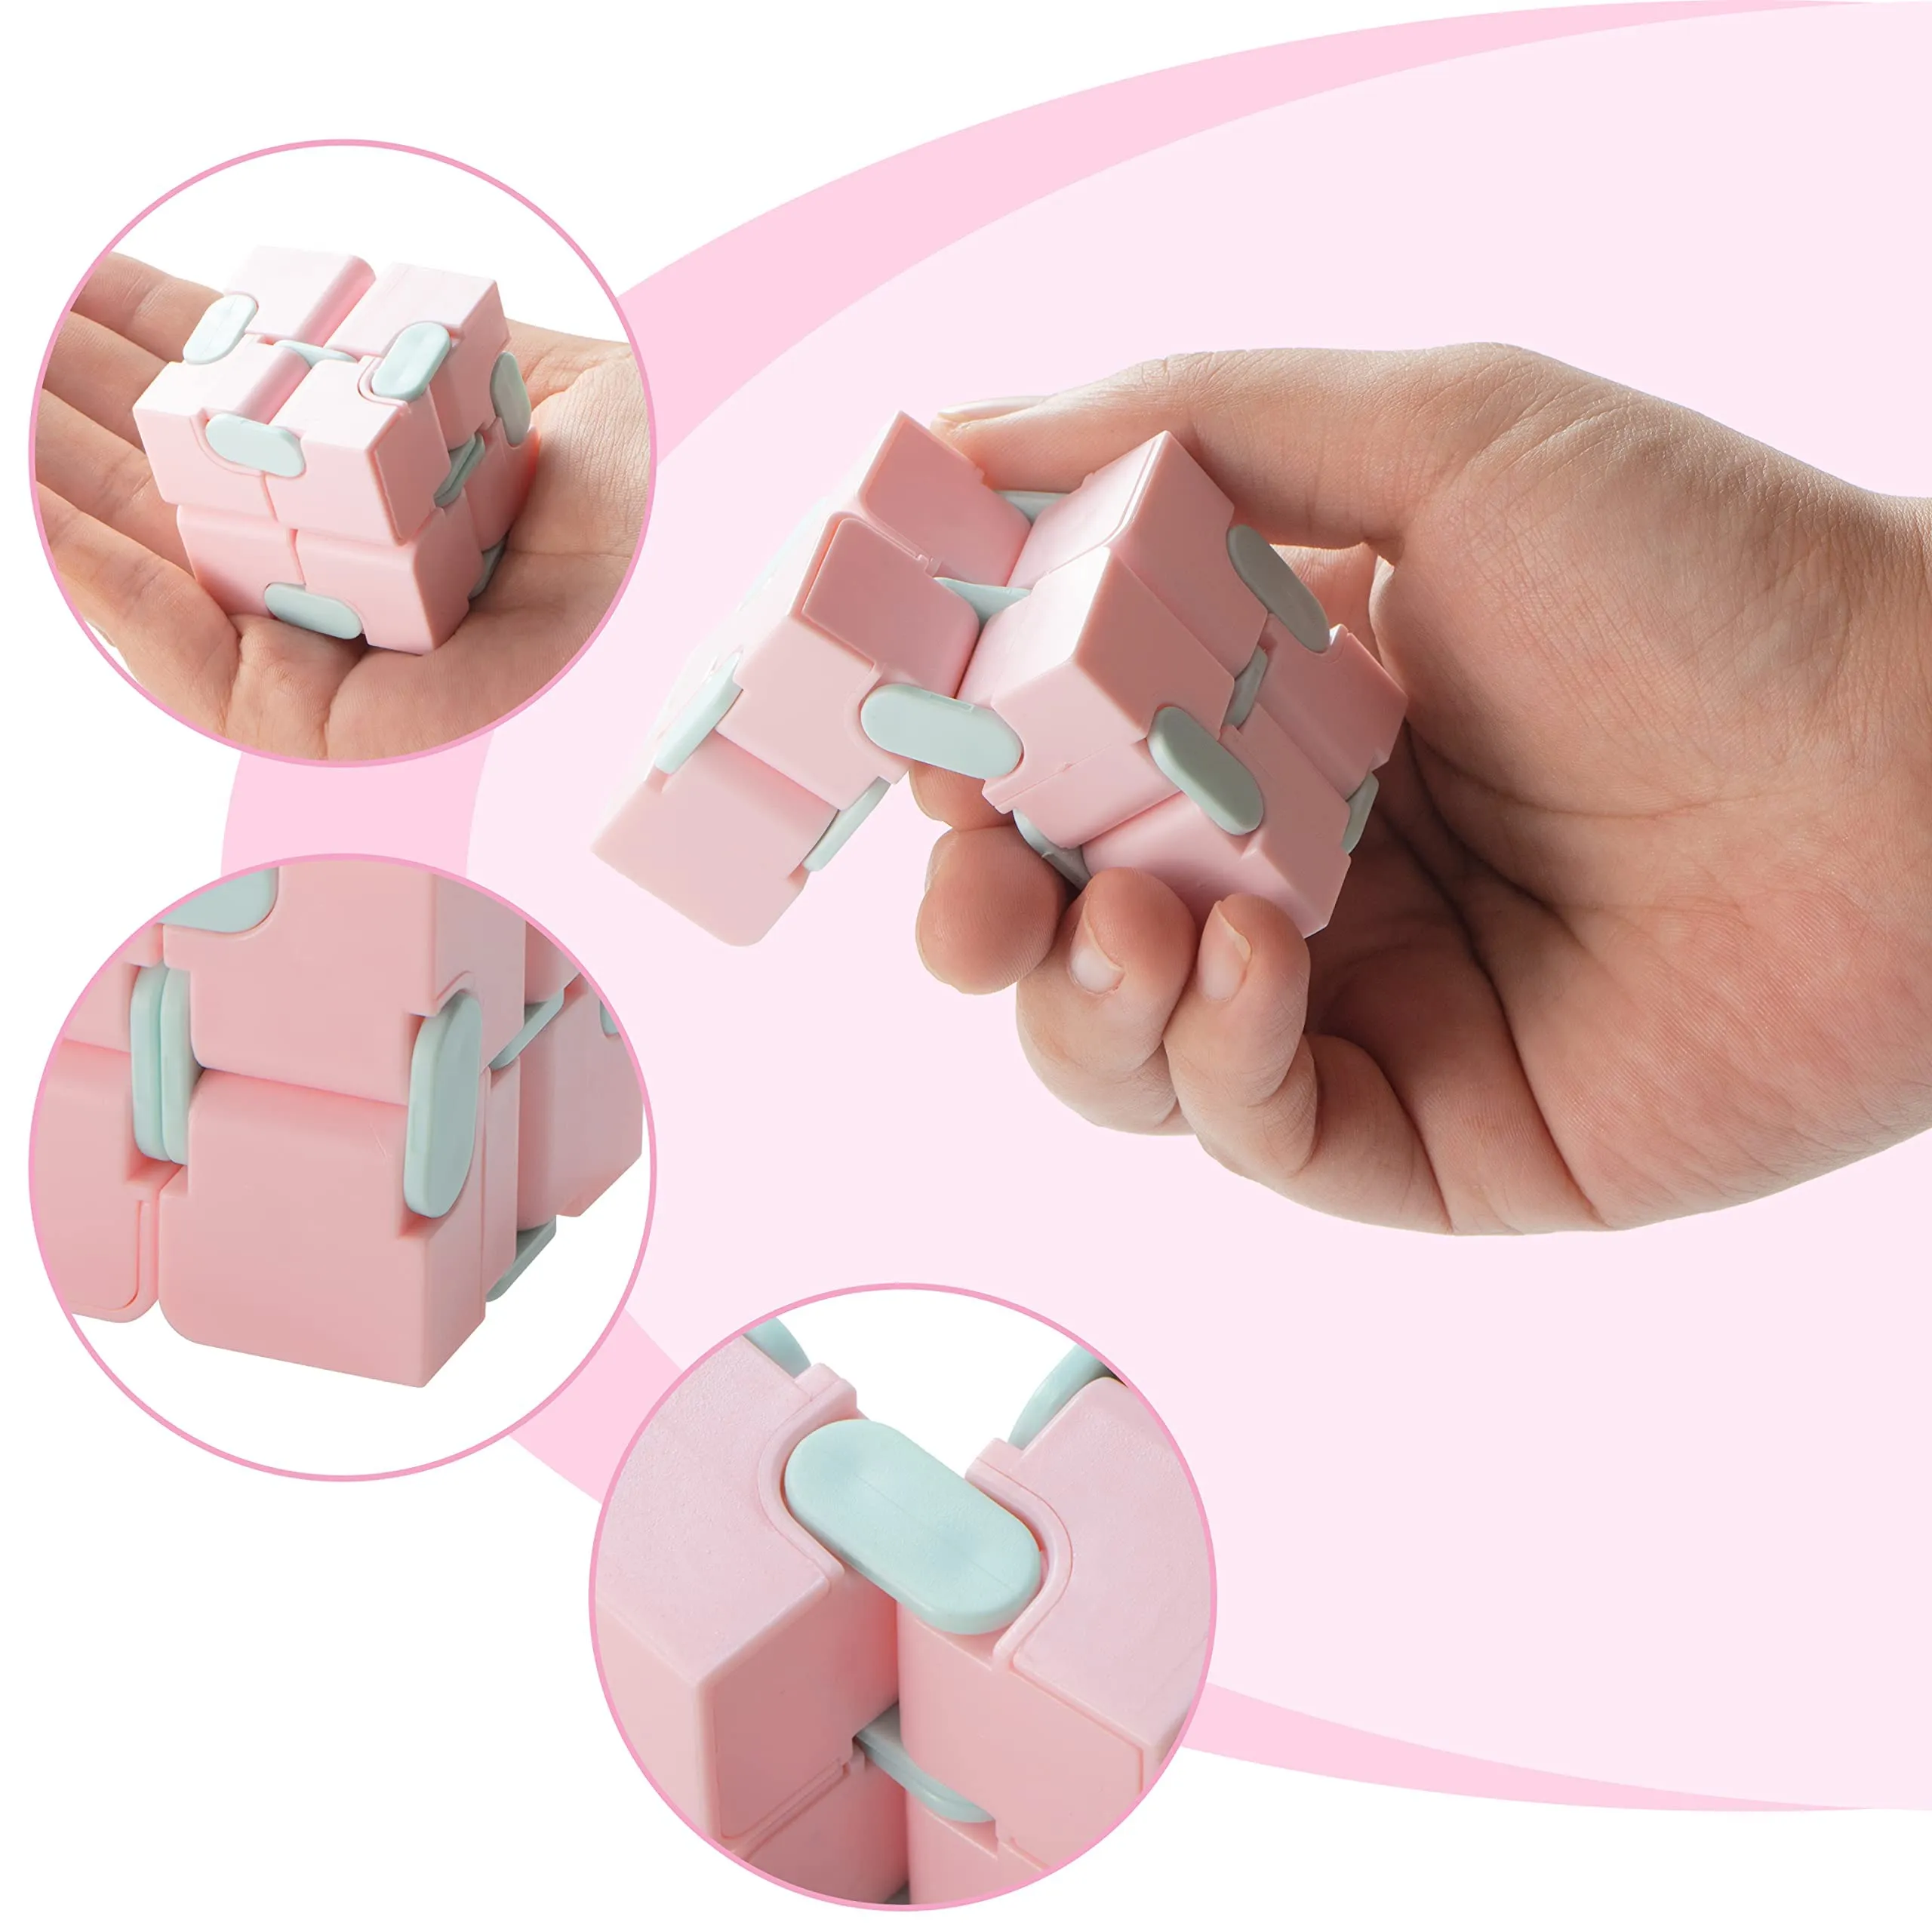 28pcs Infinity Cube Fidget Toys with Valentines Day Cards